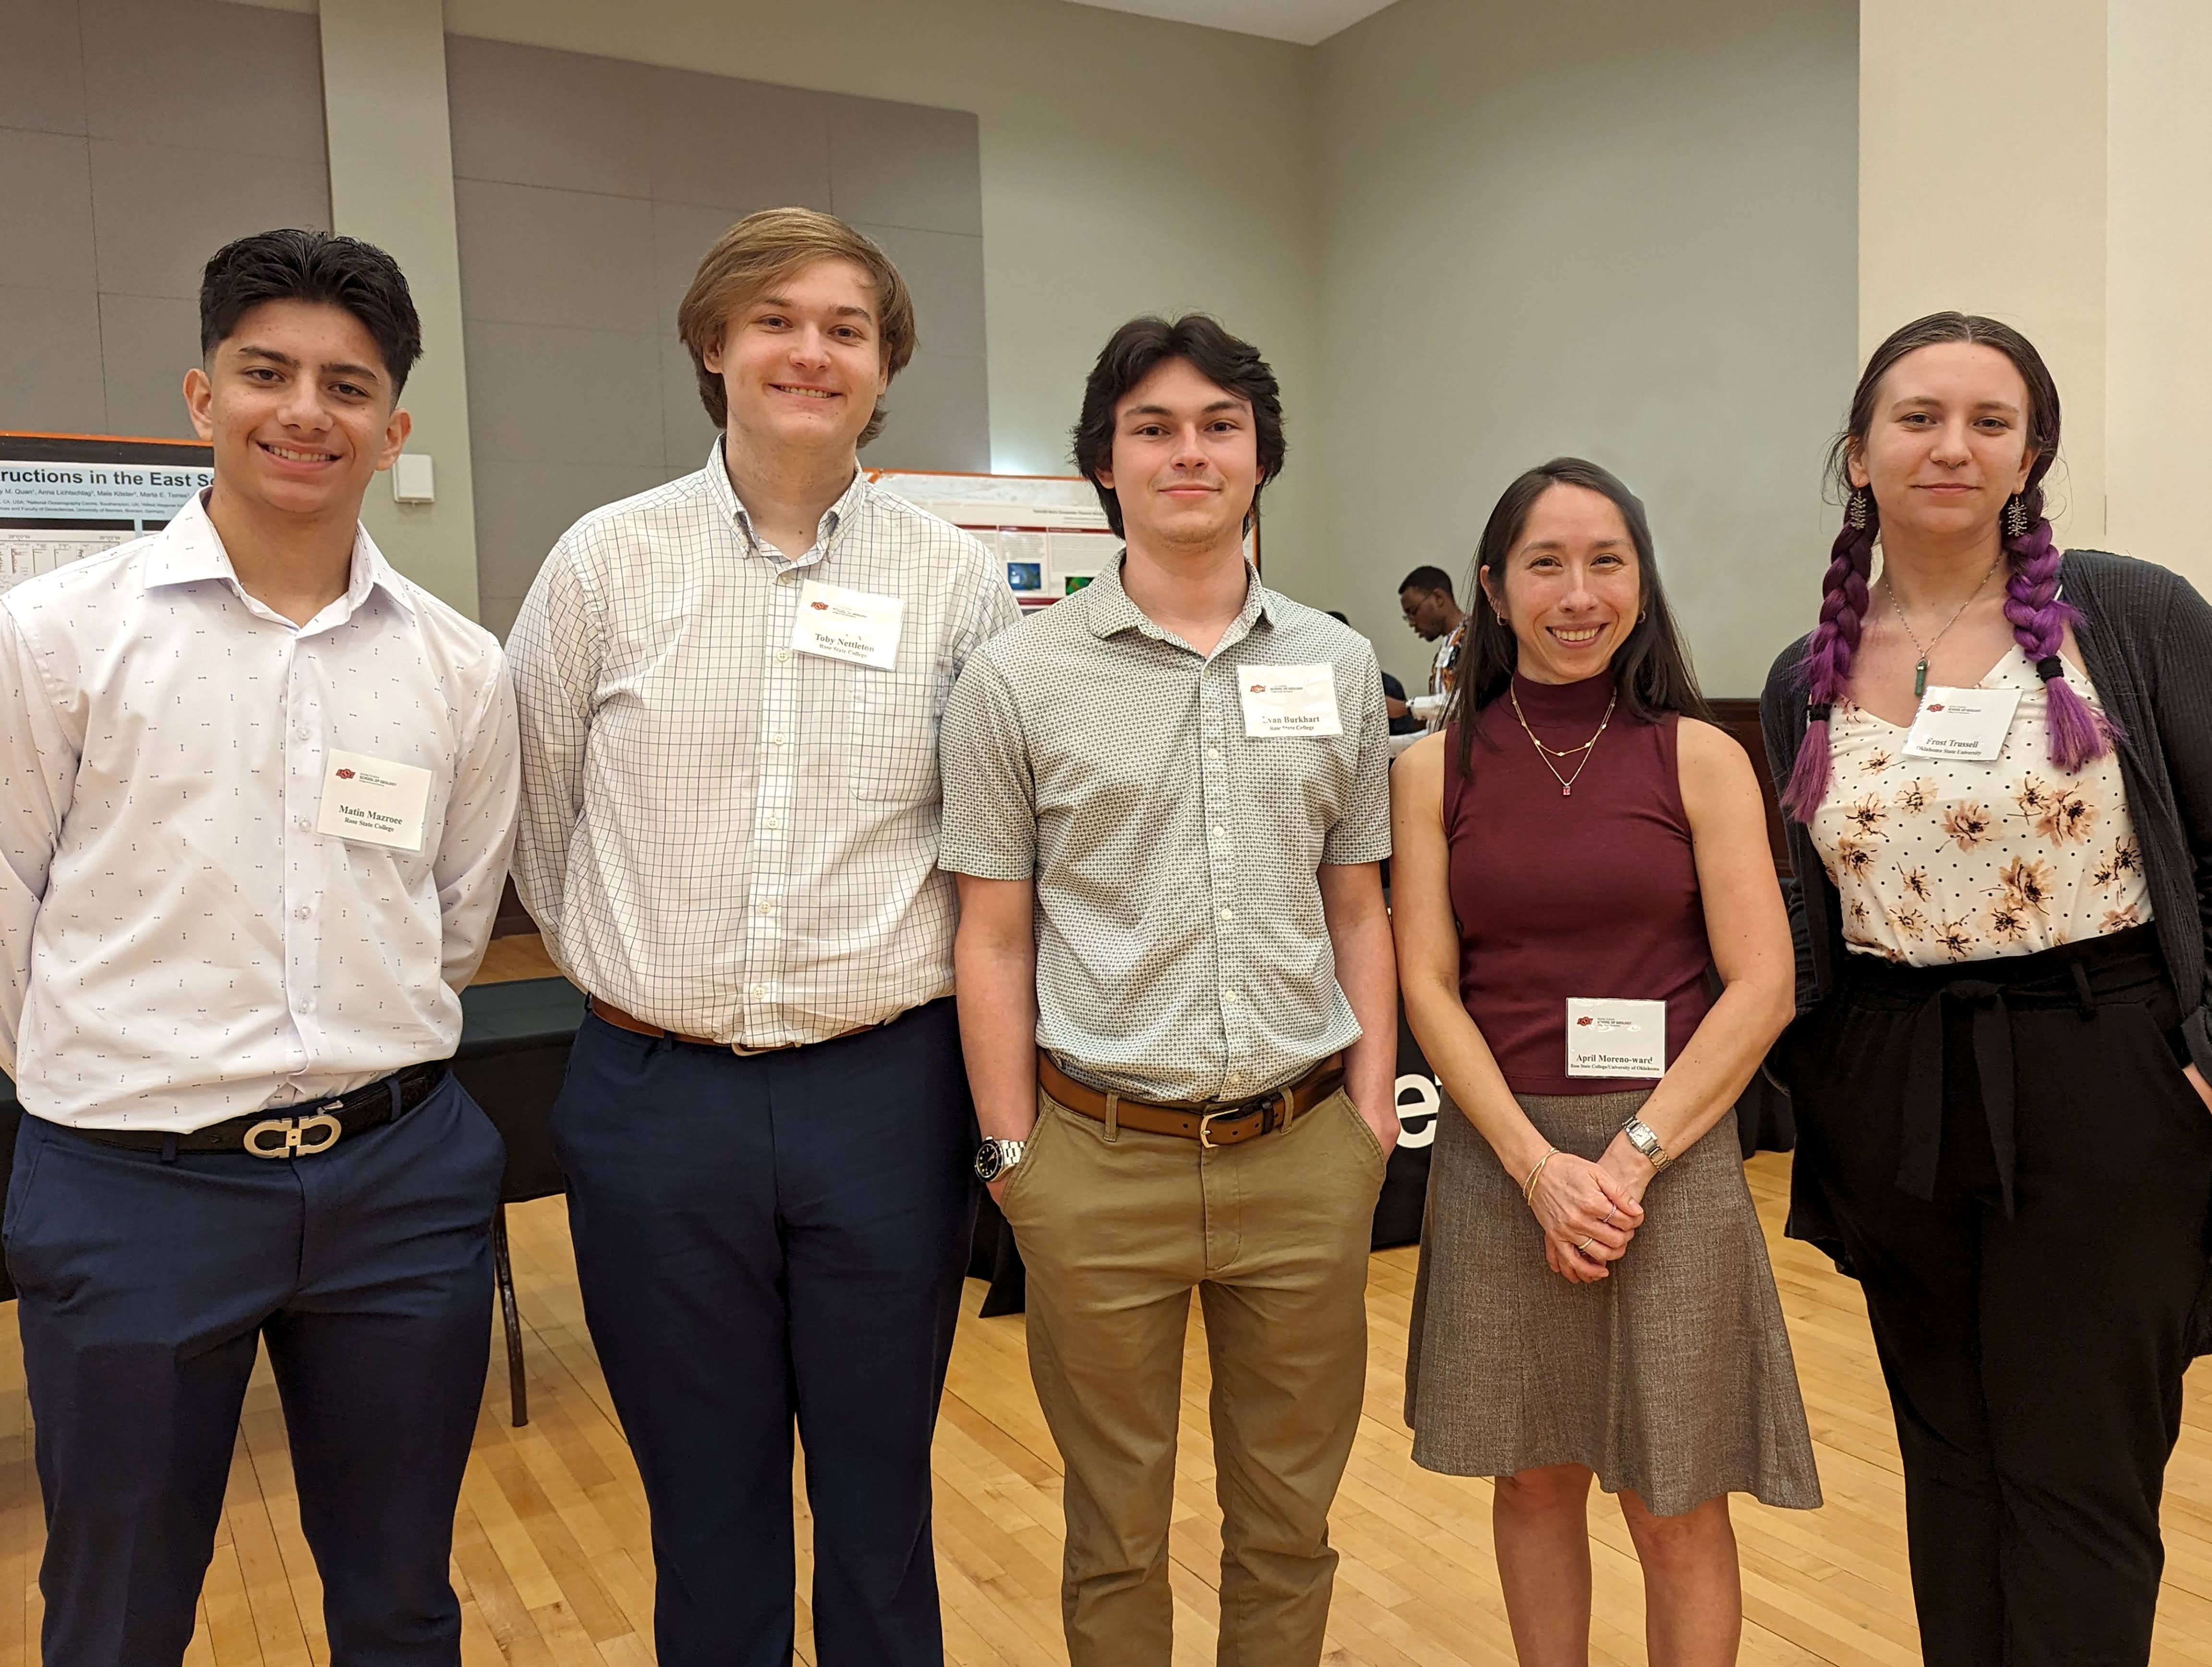 RSC Students Benefit from Partnerships with OGF, OU, OSU, and CMU